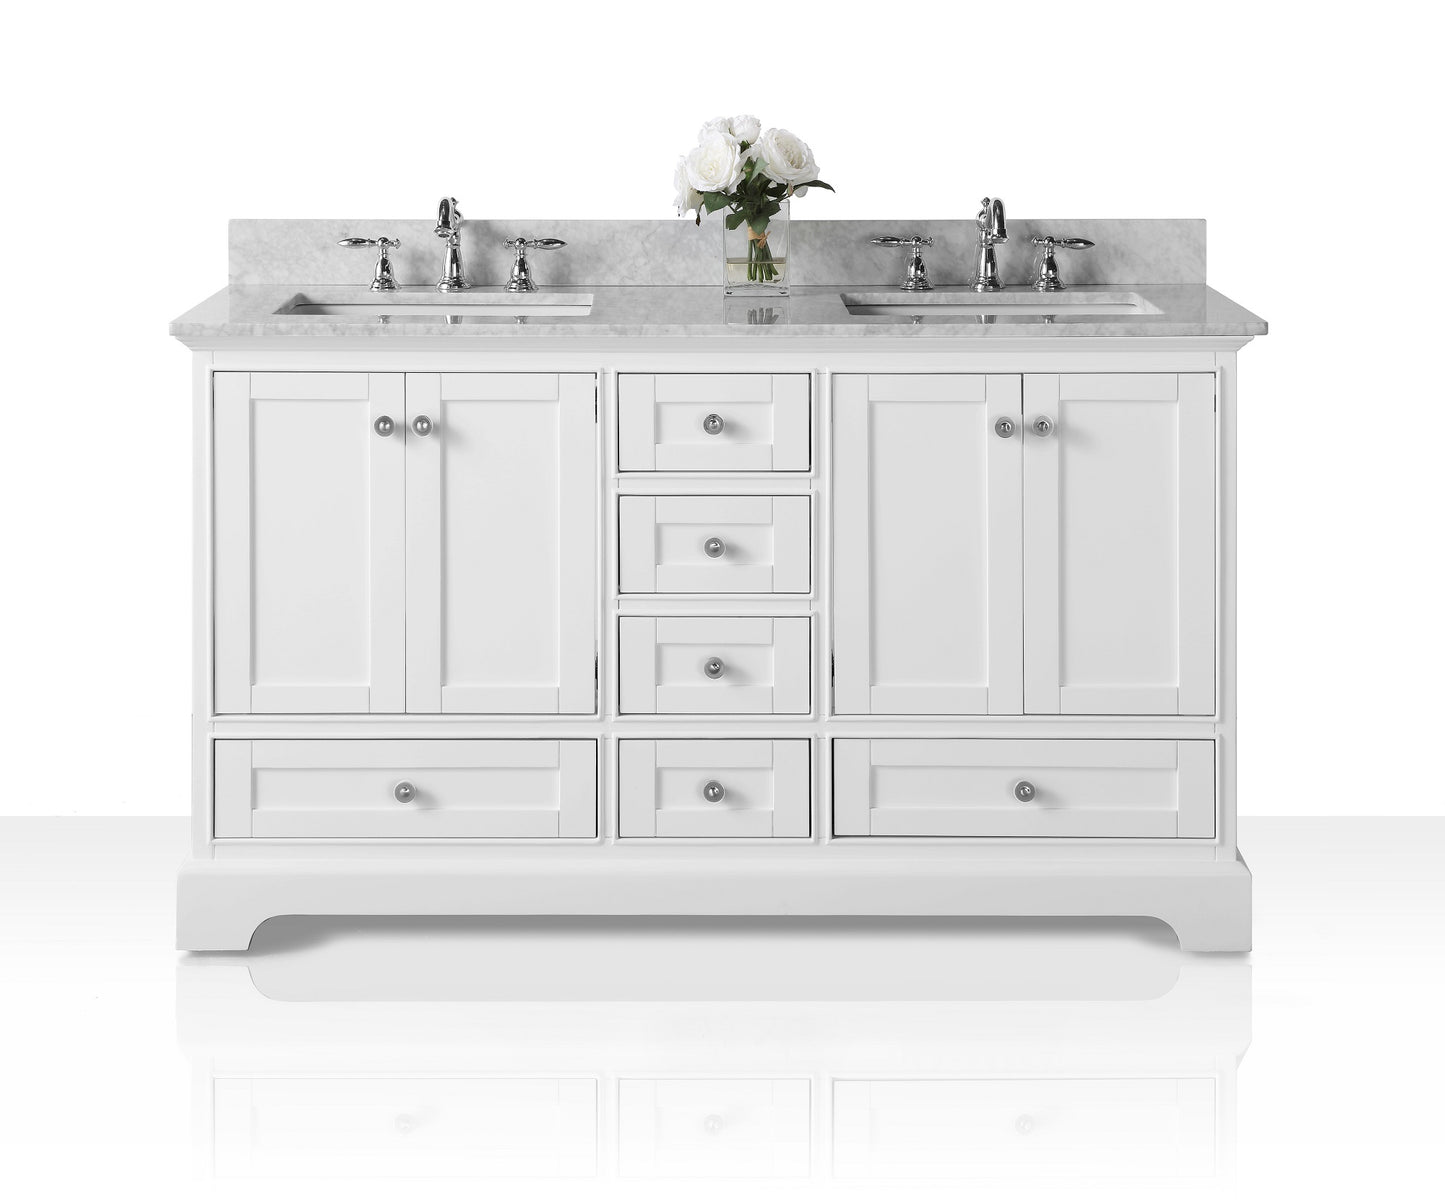 Ancerre Designs Audrey 60 in. Bath Vanity Set with Italian Carrara White Marble Vanity top and White Undermount Basin with Gold Hardware and 24 in. Onyx Black Mirror - Luxe Bathroom Vanities